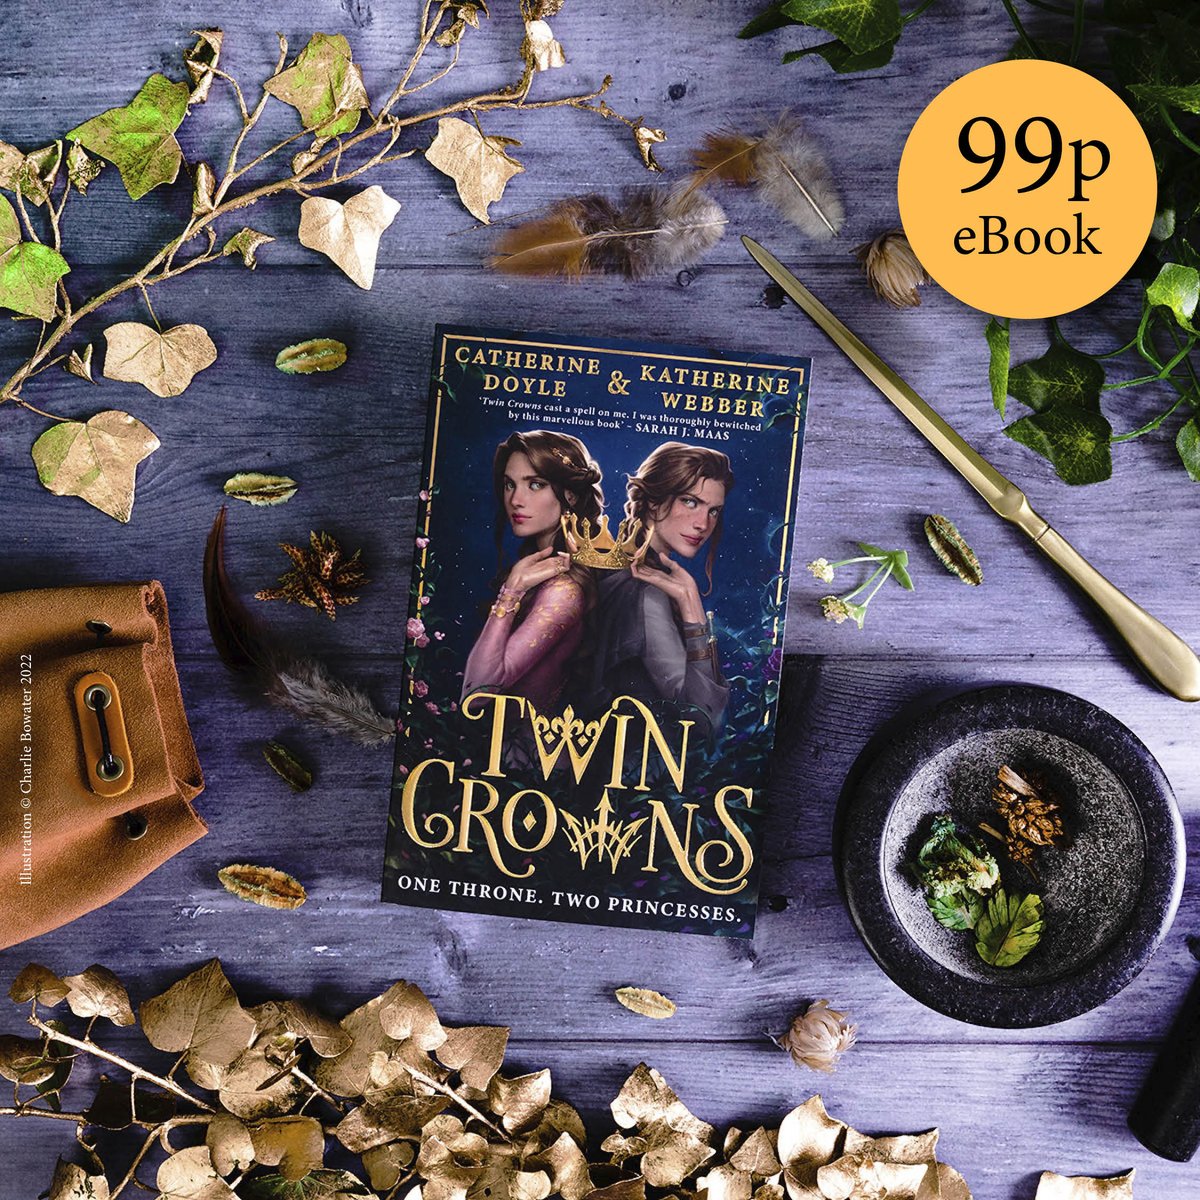 Getting Twin Crowns FOMO? Book one is 99p on Kindle for a limited time ONLY - so you can see for yourself why this trilogy has us all in a chokehold 🤧 Get the Twin Crowns ebook now: ow.ly/KfoU50REkga @kwebberwrites @doyle_cat